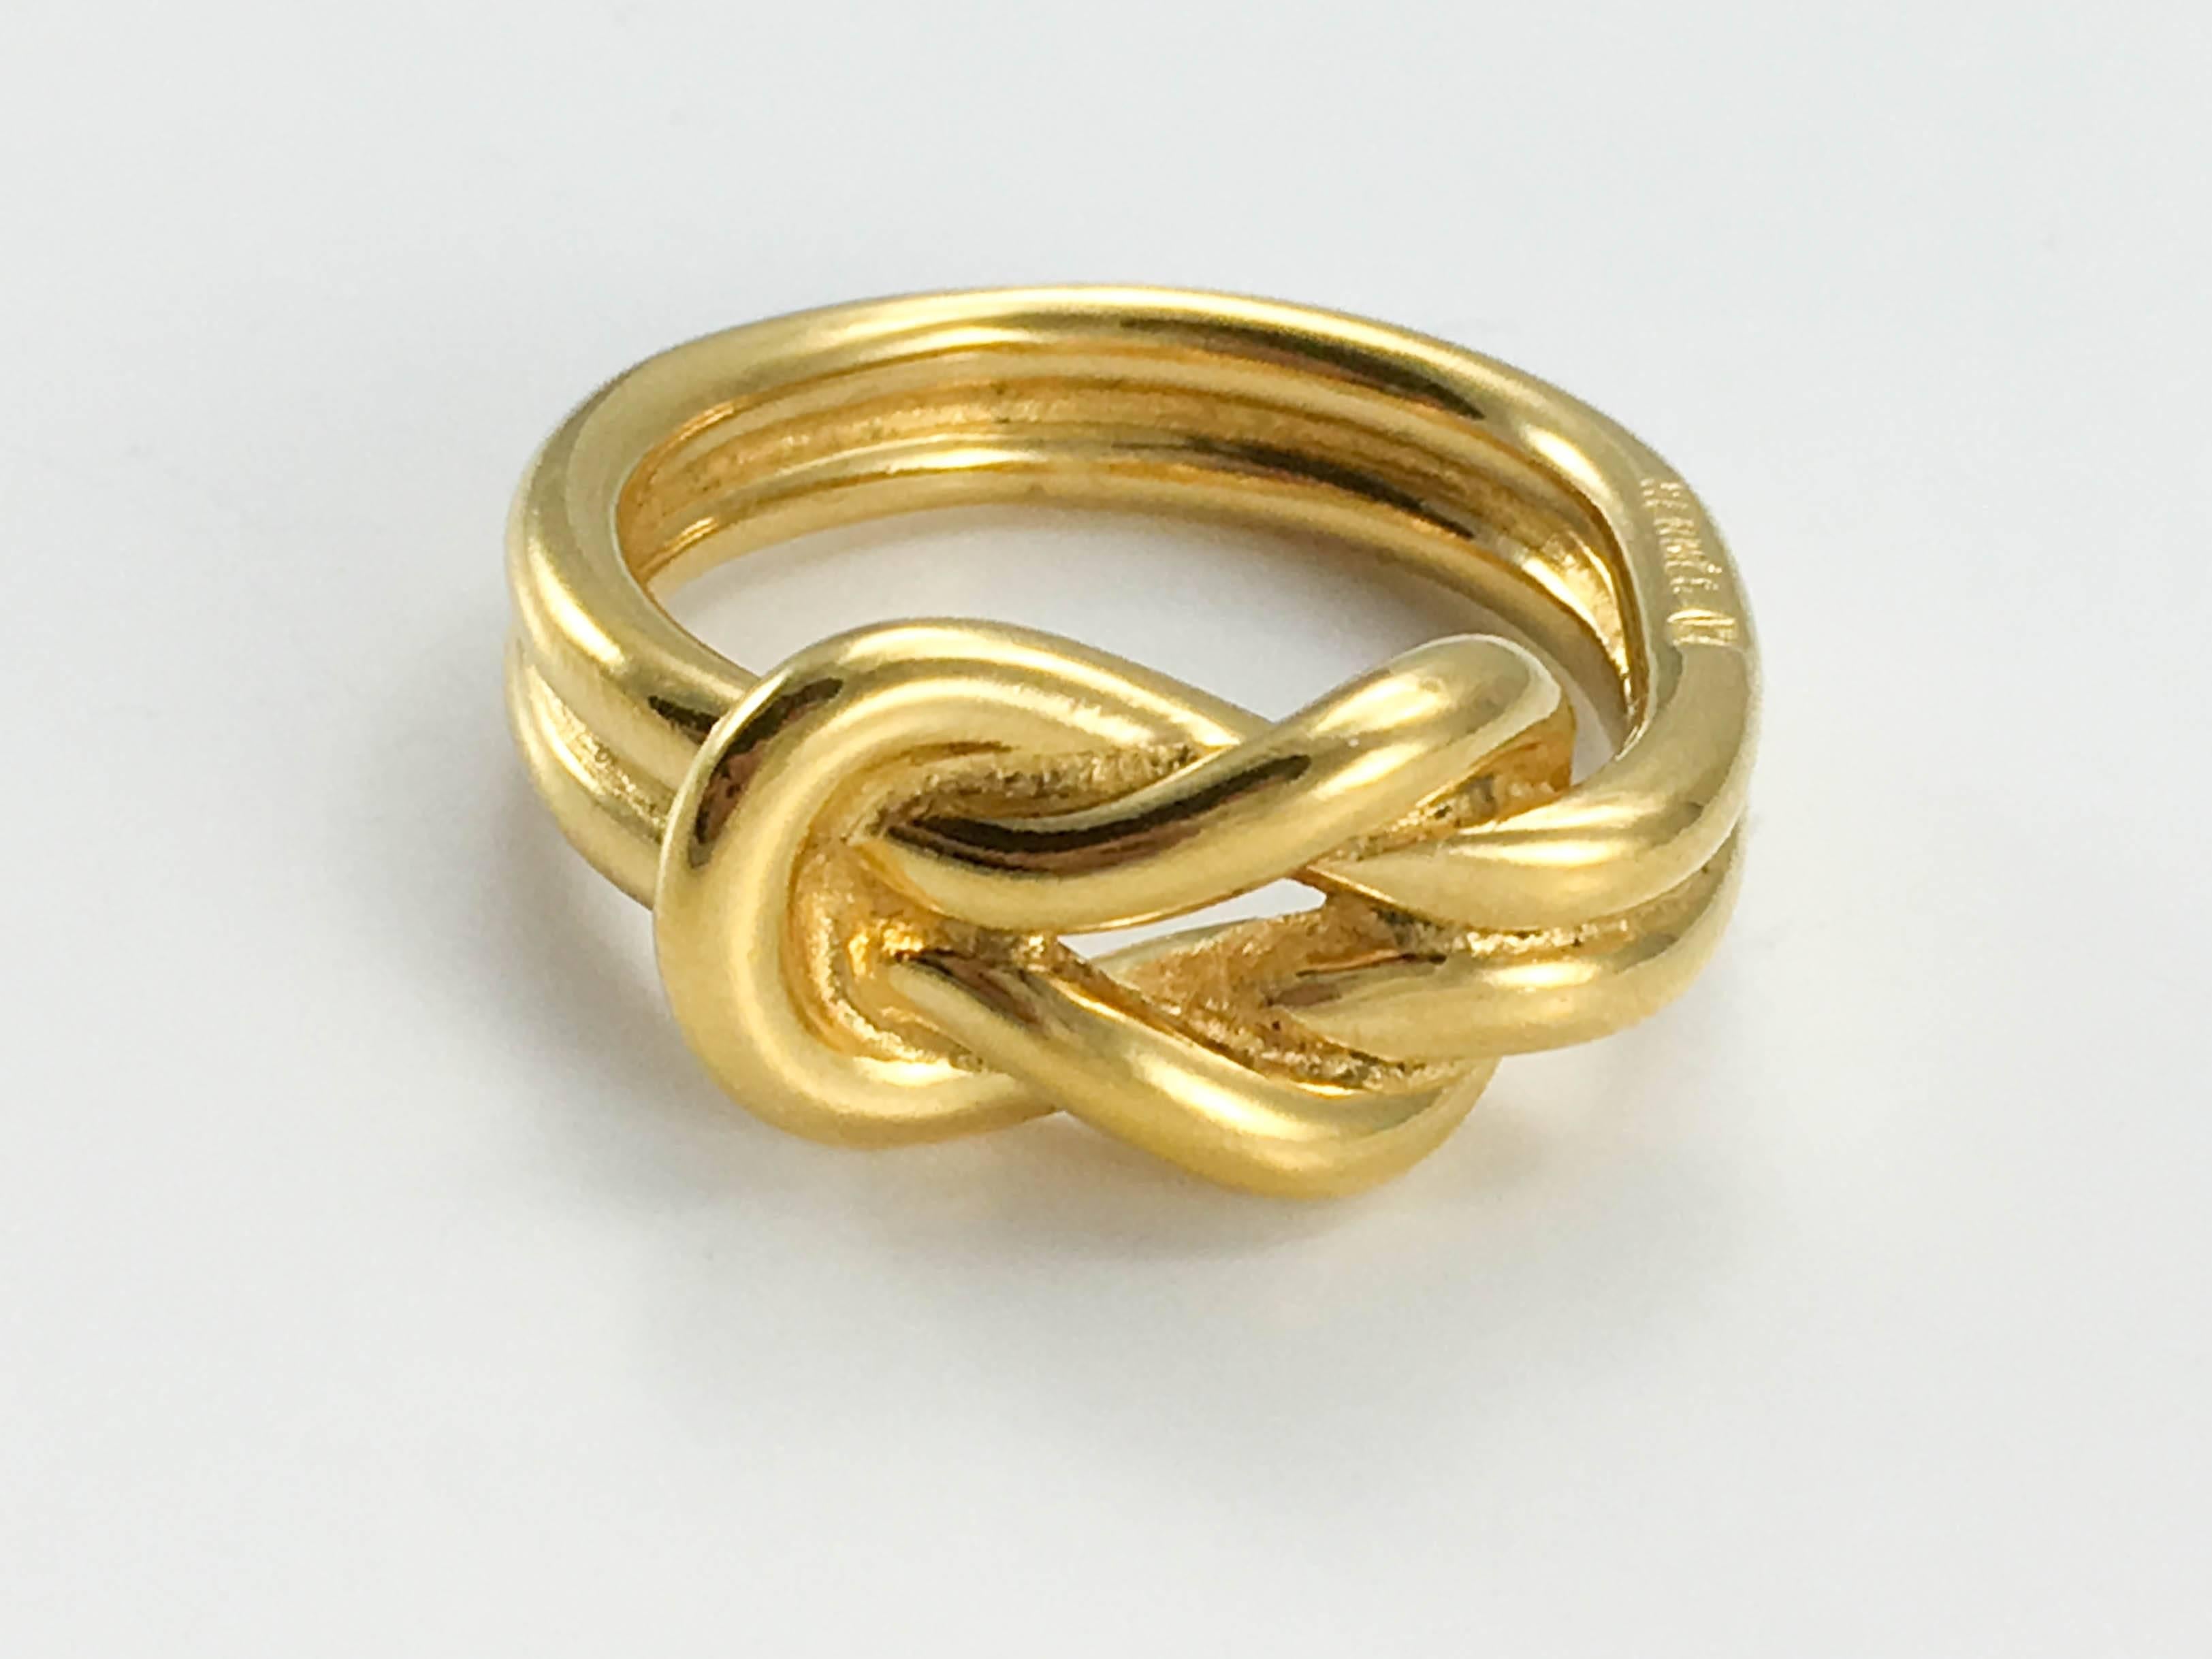 Really stylish Hermes Scarf Ring. This is a classic Hermes knot design, with very clean and elegant lines. This can be worn as a scarf ring or as a ring. A small detail that will make all the difference. Hermes signed.

Designer/Label: